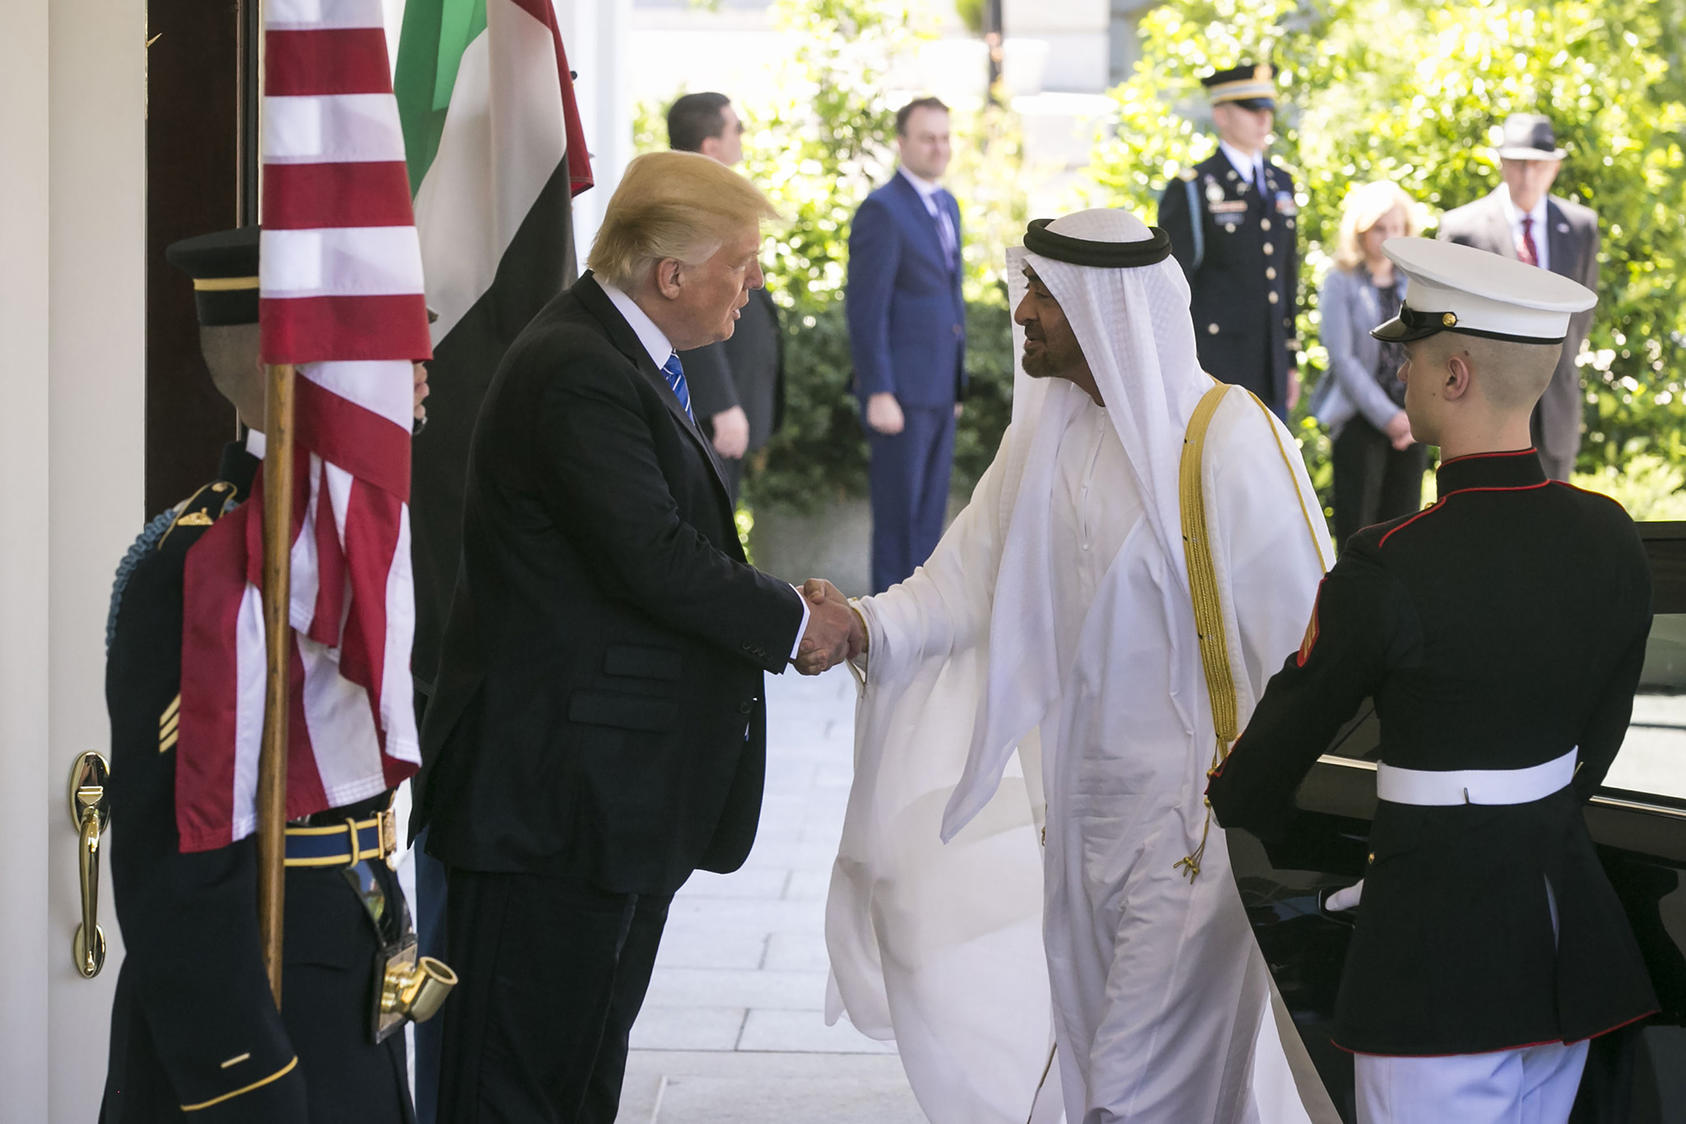 President Trump greets Emirati Prince Mohammed bin Zayed at the White House. May 15, 2017. (Al Drago/New York Times)